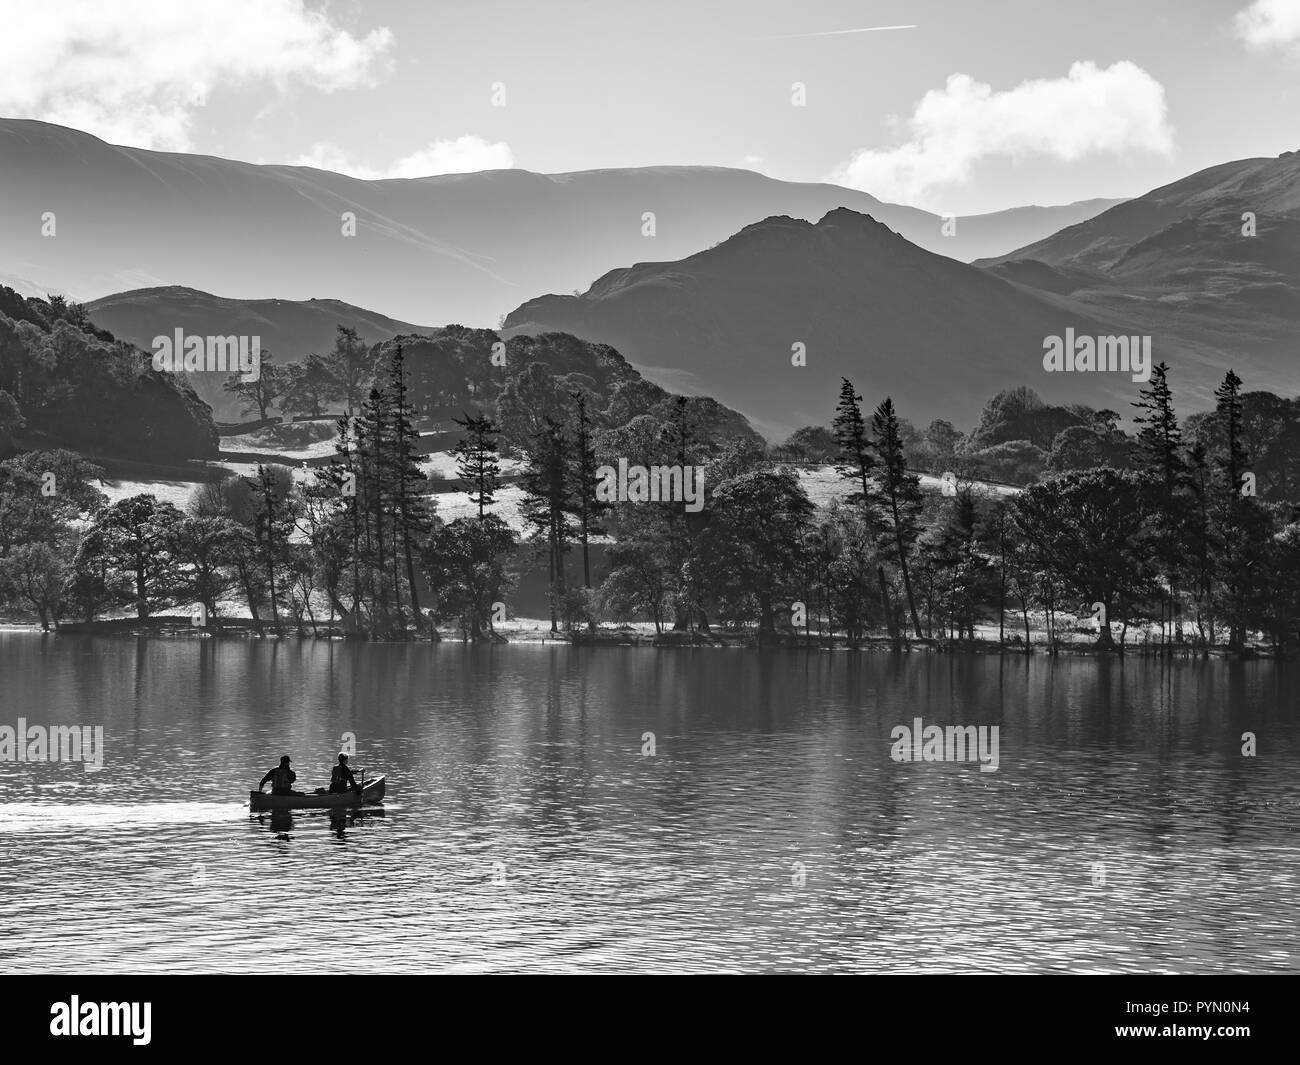 A peaceful, serene morning view of kayakers on Ullswater in England's Lake District. Stock Photo